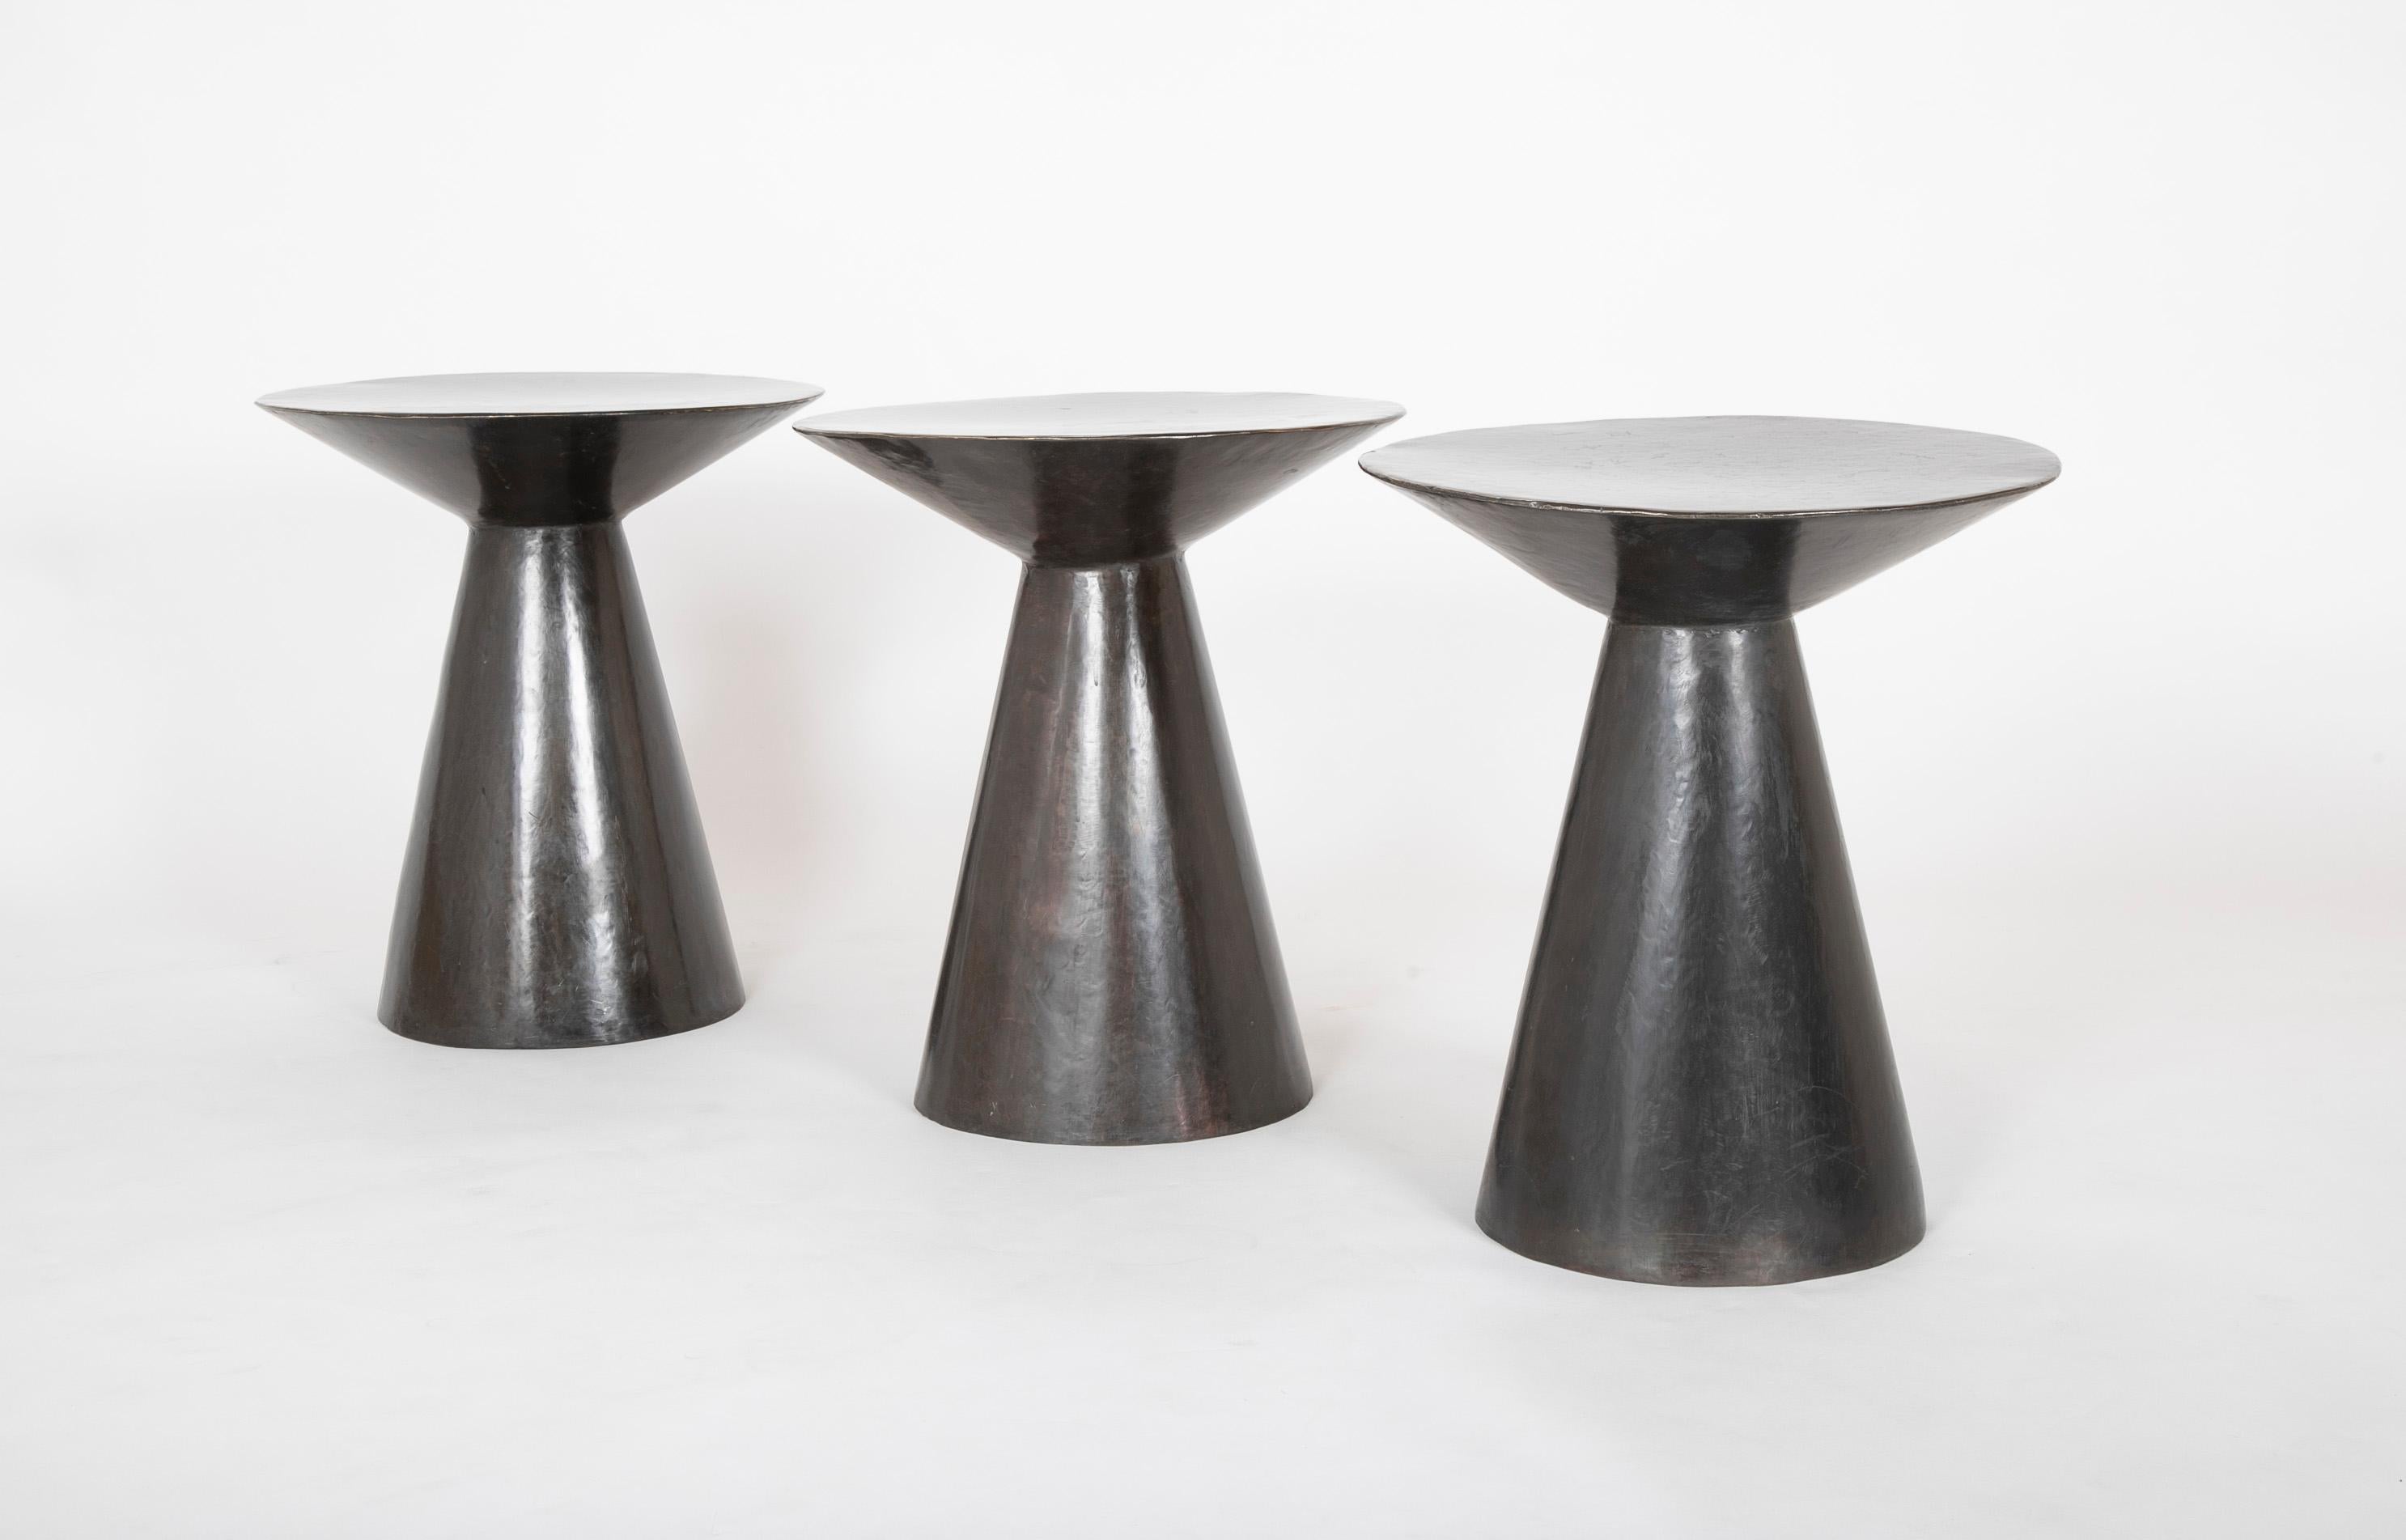 Late 20th century patinated bronze side tables deaccessioned from Lazard Banque. Produced in France.  Sold Individually.